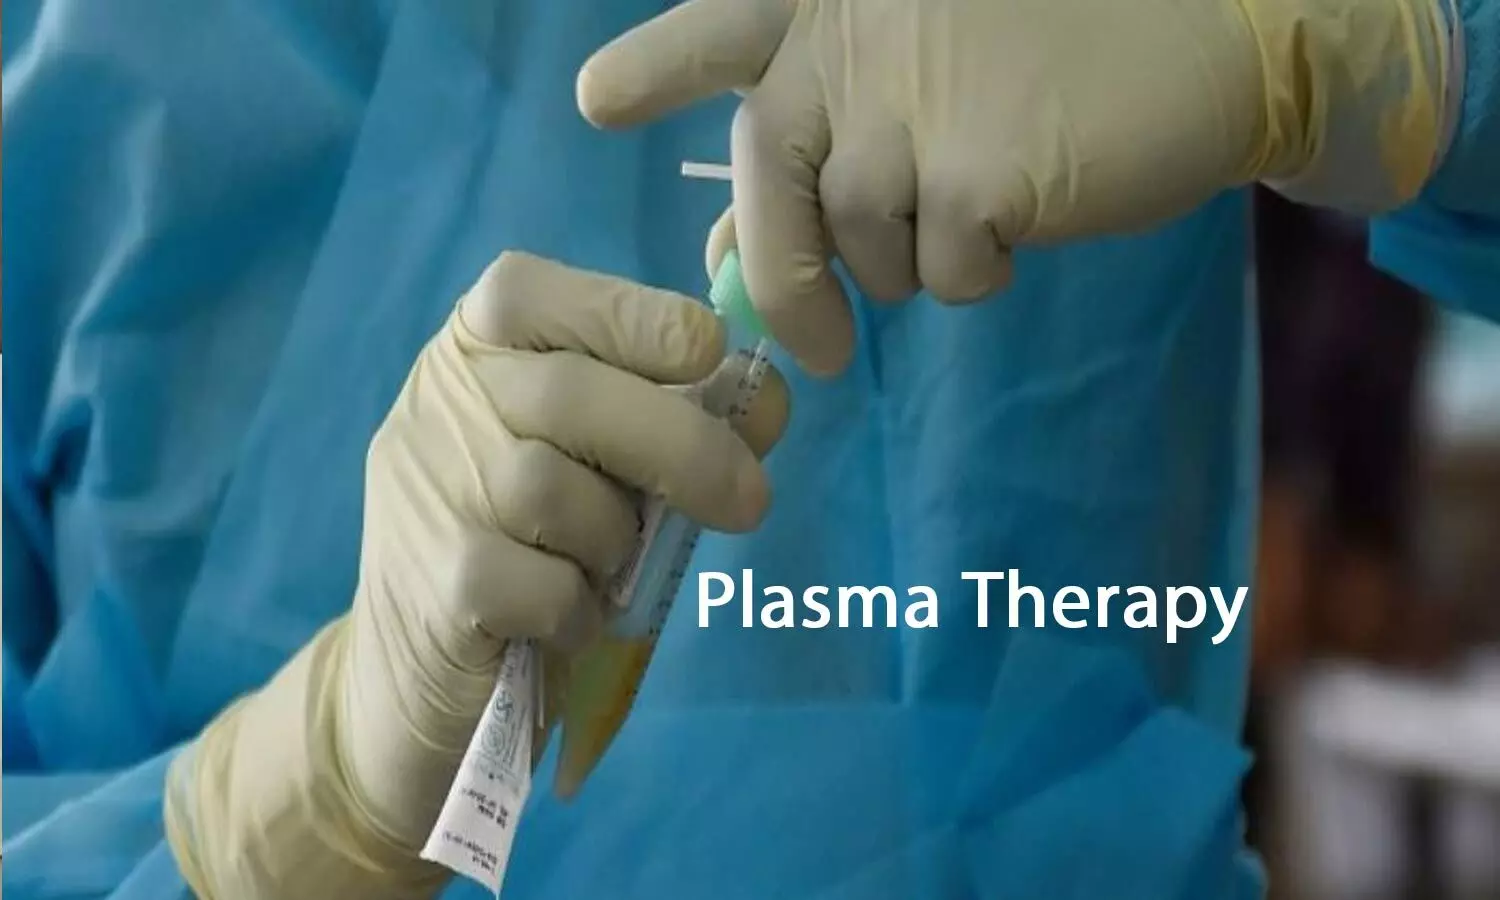 COVID-19: ICMR approves 21 institutions for participating in clinical trials of plasma therapy